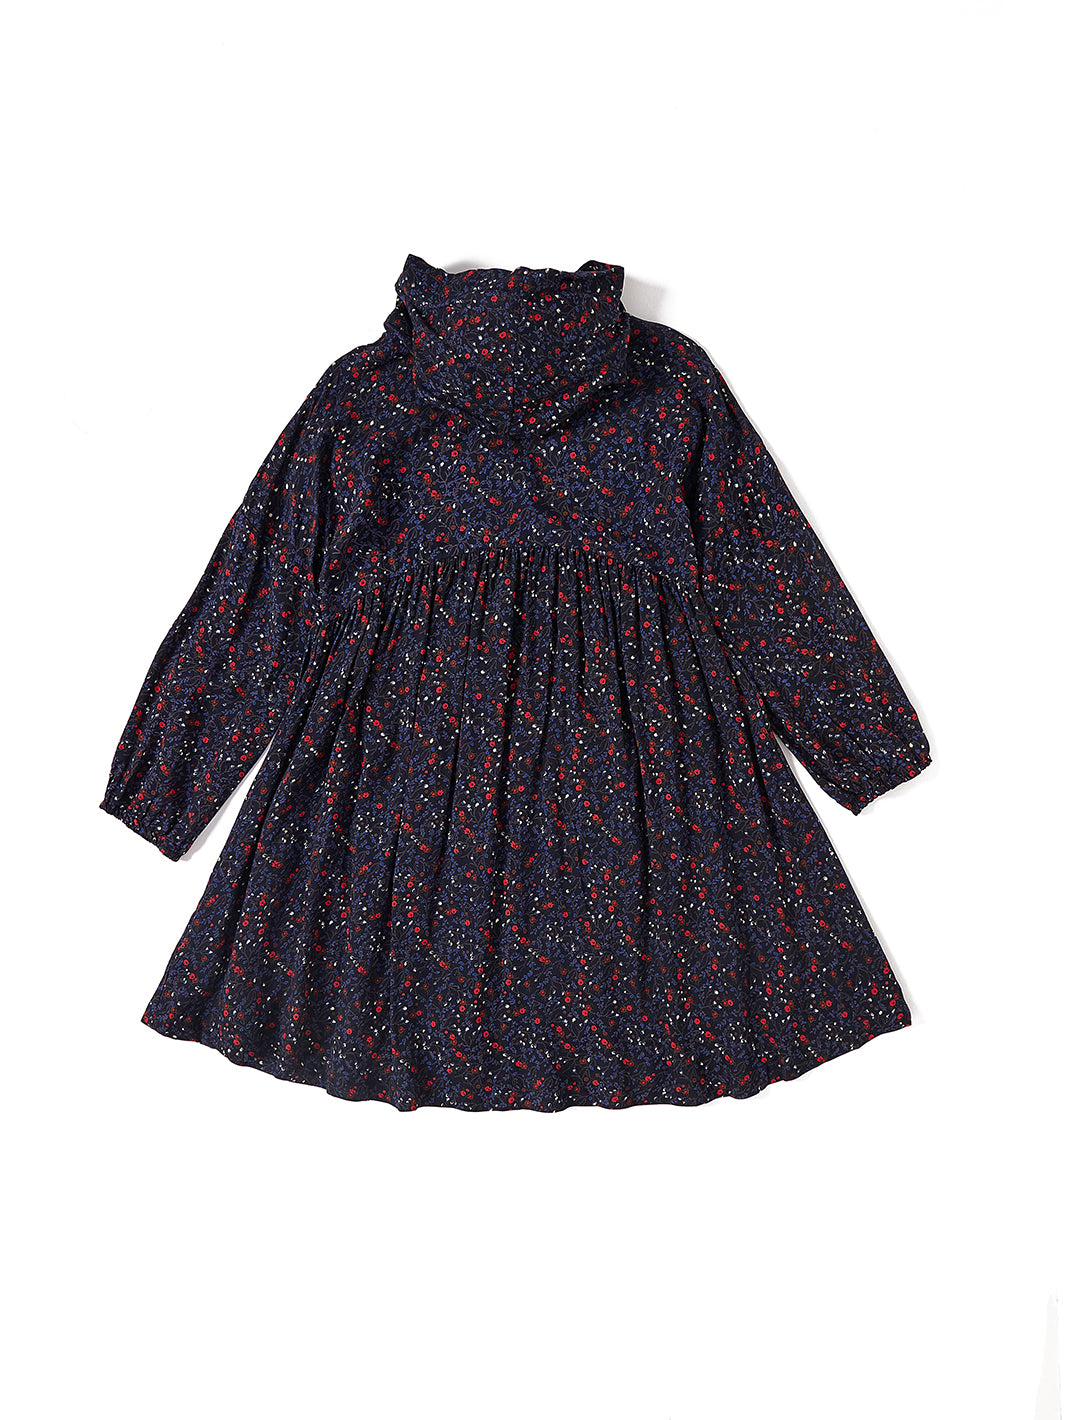 Floral Berry Hooded Dress